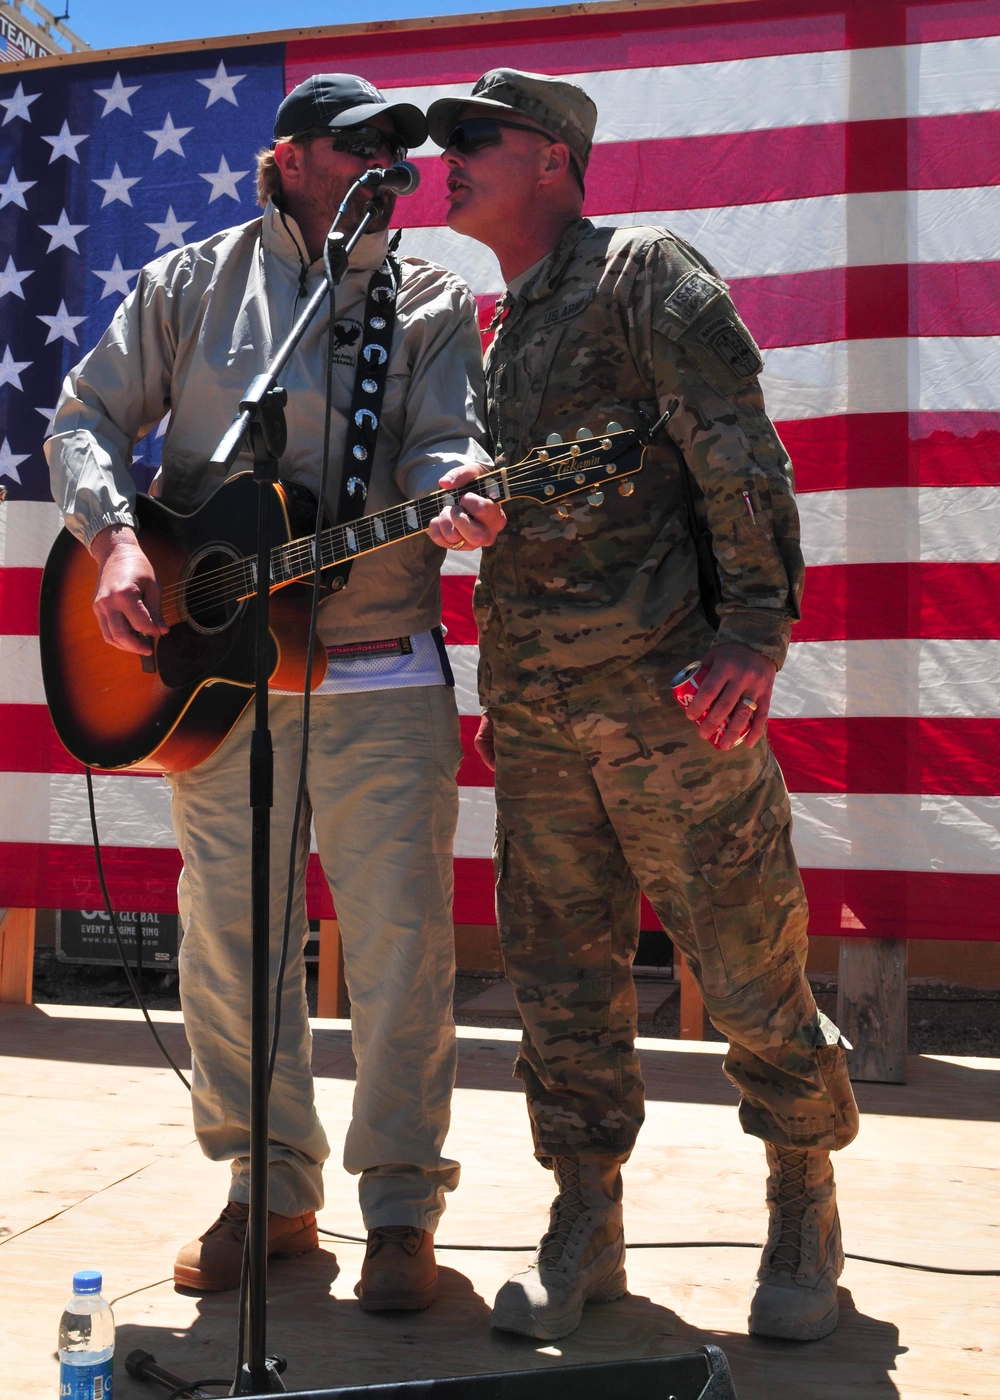 Toby Keith rocks Forward Operating Base Sharana in a surprise concert at the 172nd Infantry Brigade headquarters, April 29. Named one of the top 10 most dangerous places by Maxim Magazine, FOB Sharana and the surrounding combat outposts, are the center of the fight against foreign insurgents trying to infiltrate into Afghanistan. Keith will perform additional concerts in Afghanistan over the following days. U.S. Army photo.